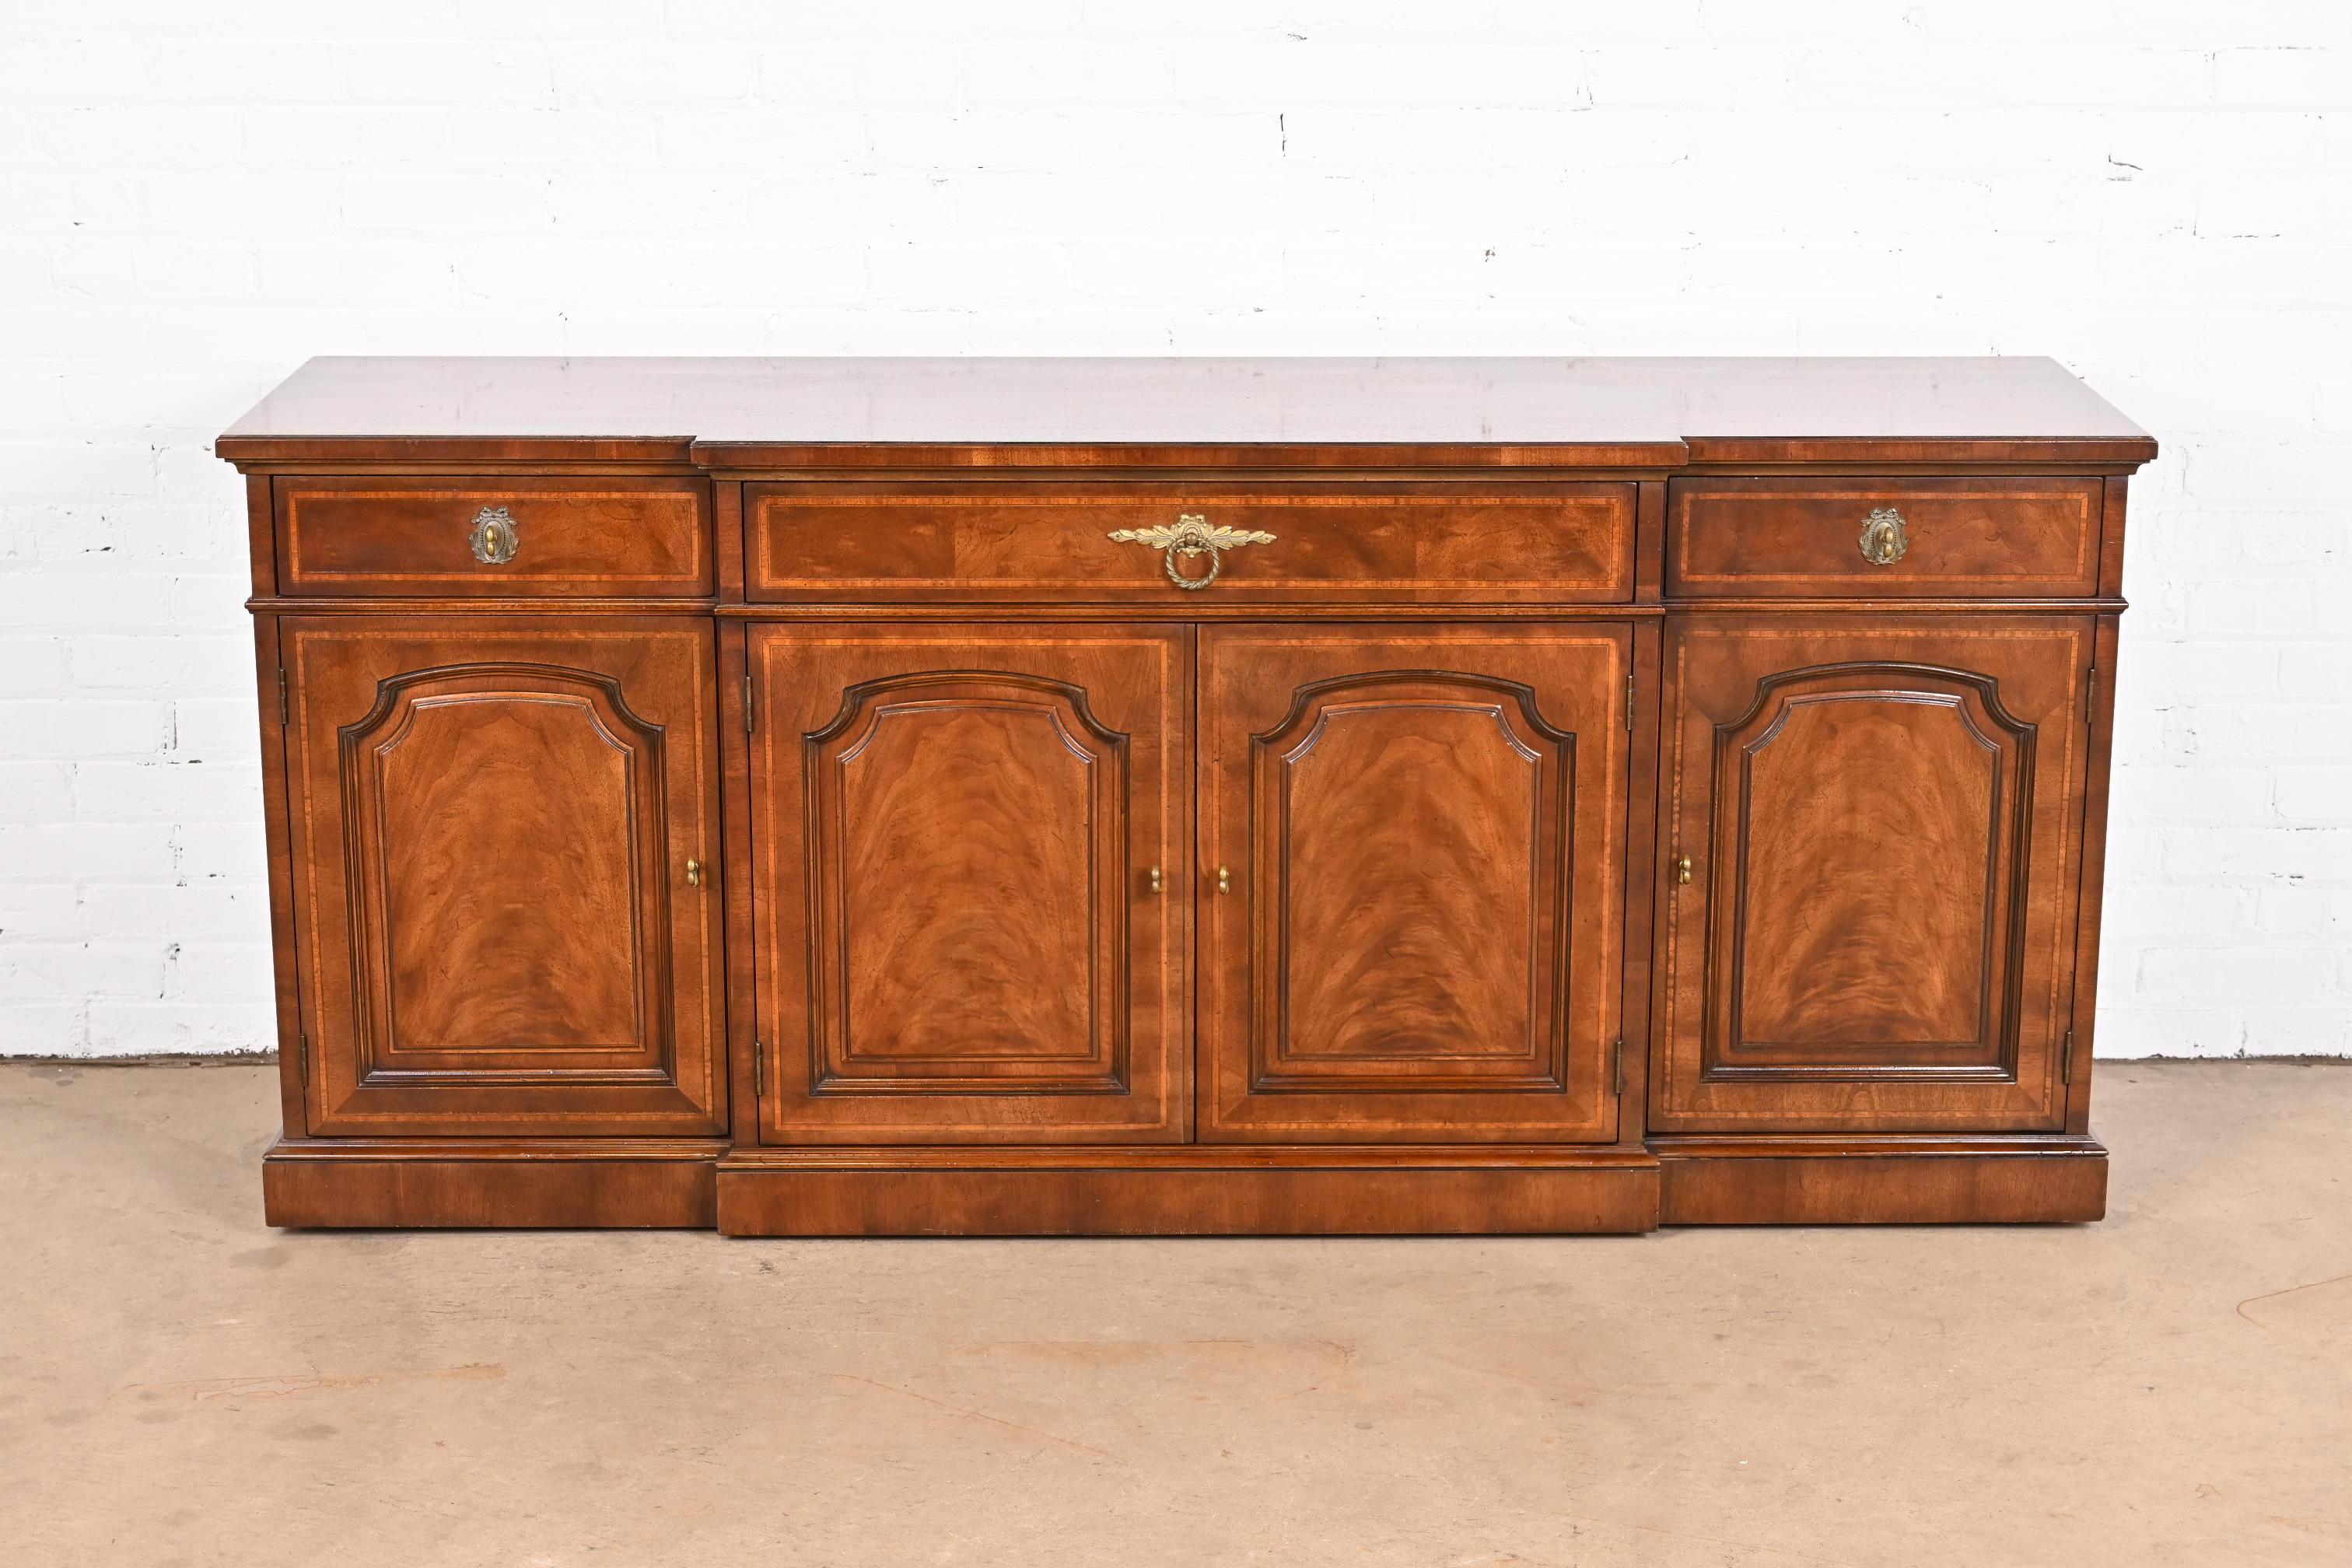 A gorgeous French Regency Louis XVI style sideboard, credenza, or bar cabinet

By Henredon

USA, Circa 1970s

Measures: 70